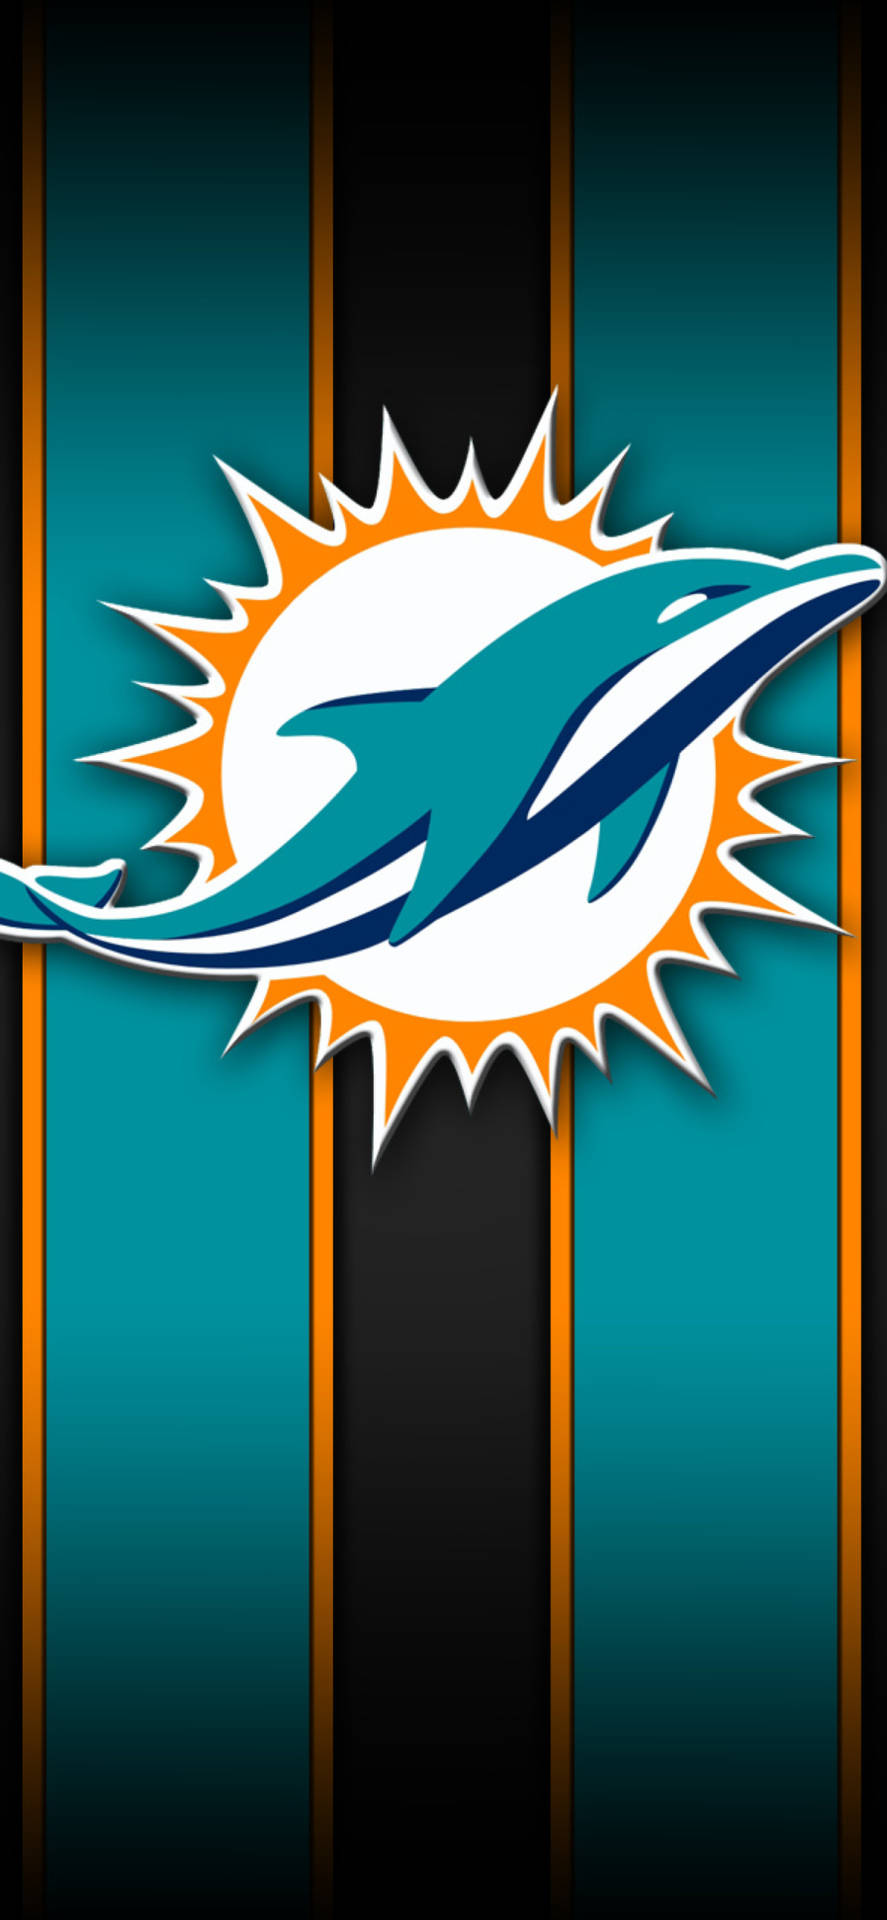 Show your team spirit with a Miami Dolphins iPhone! Wallpaper